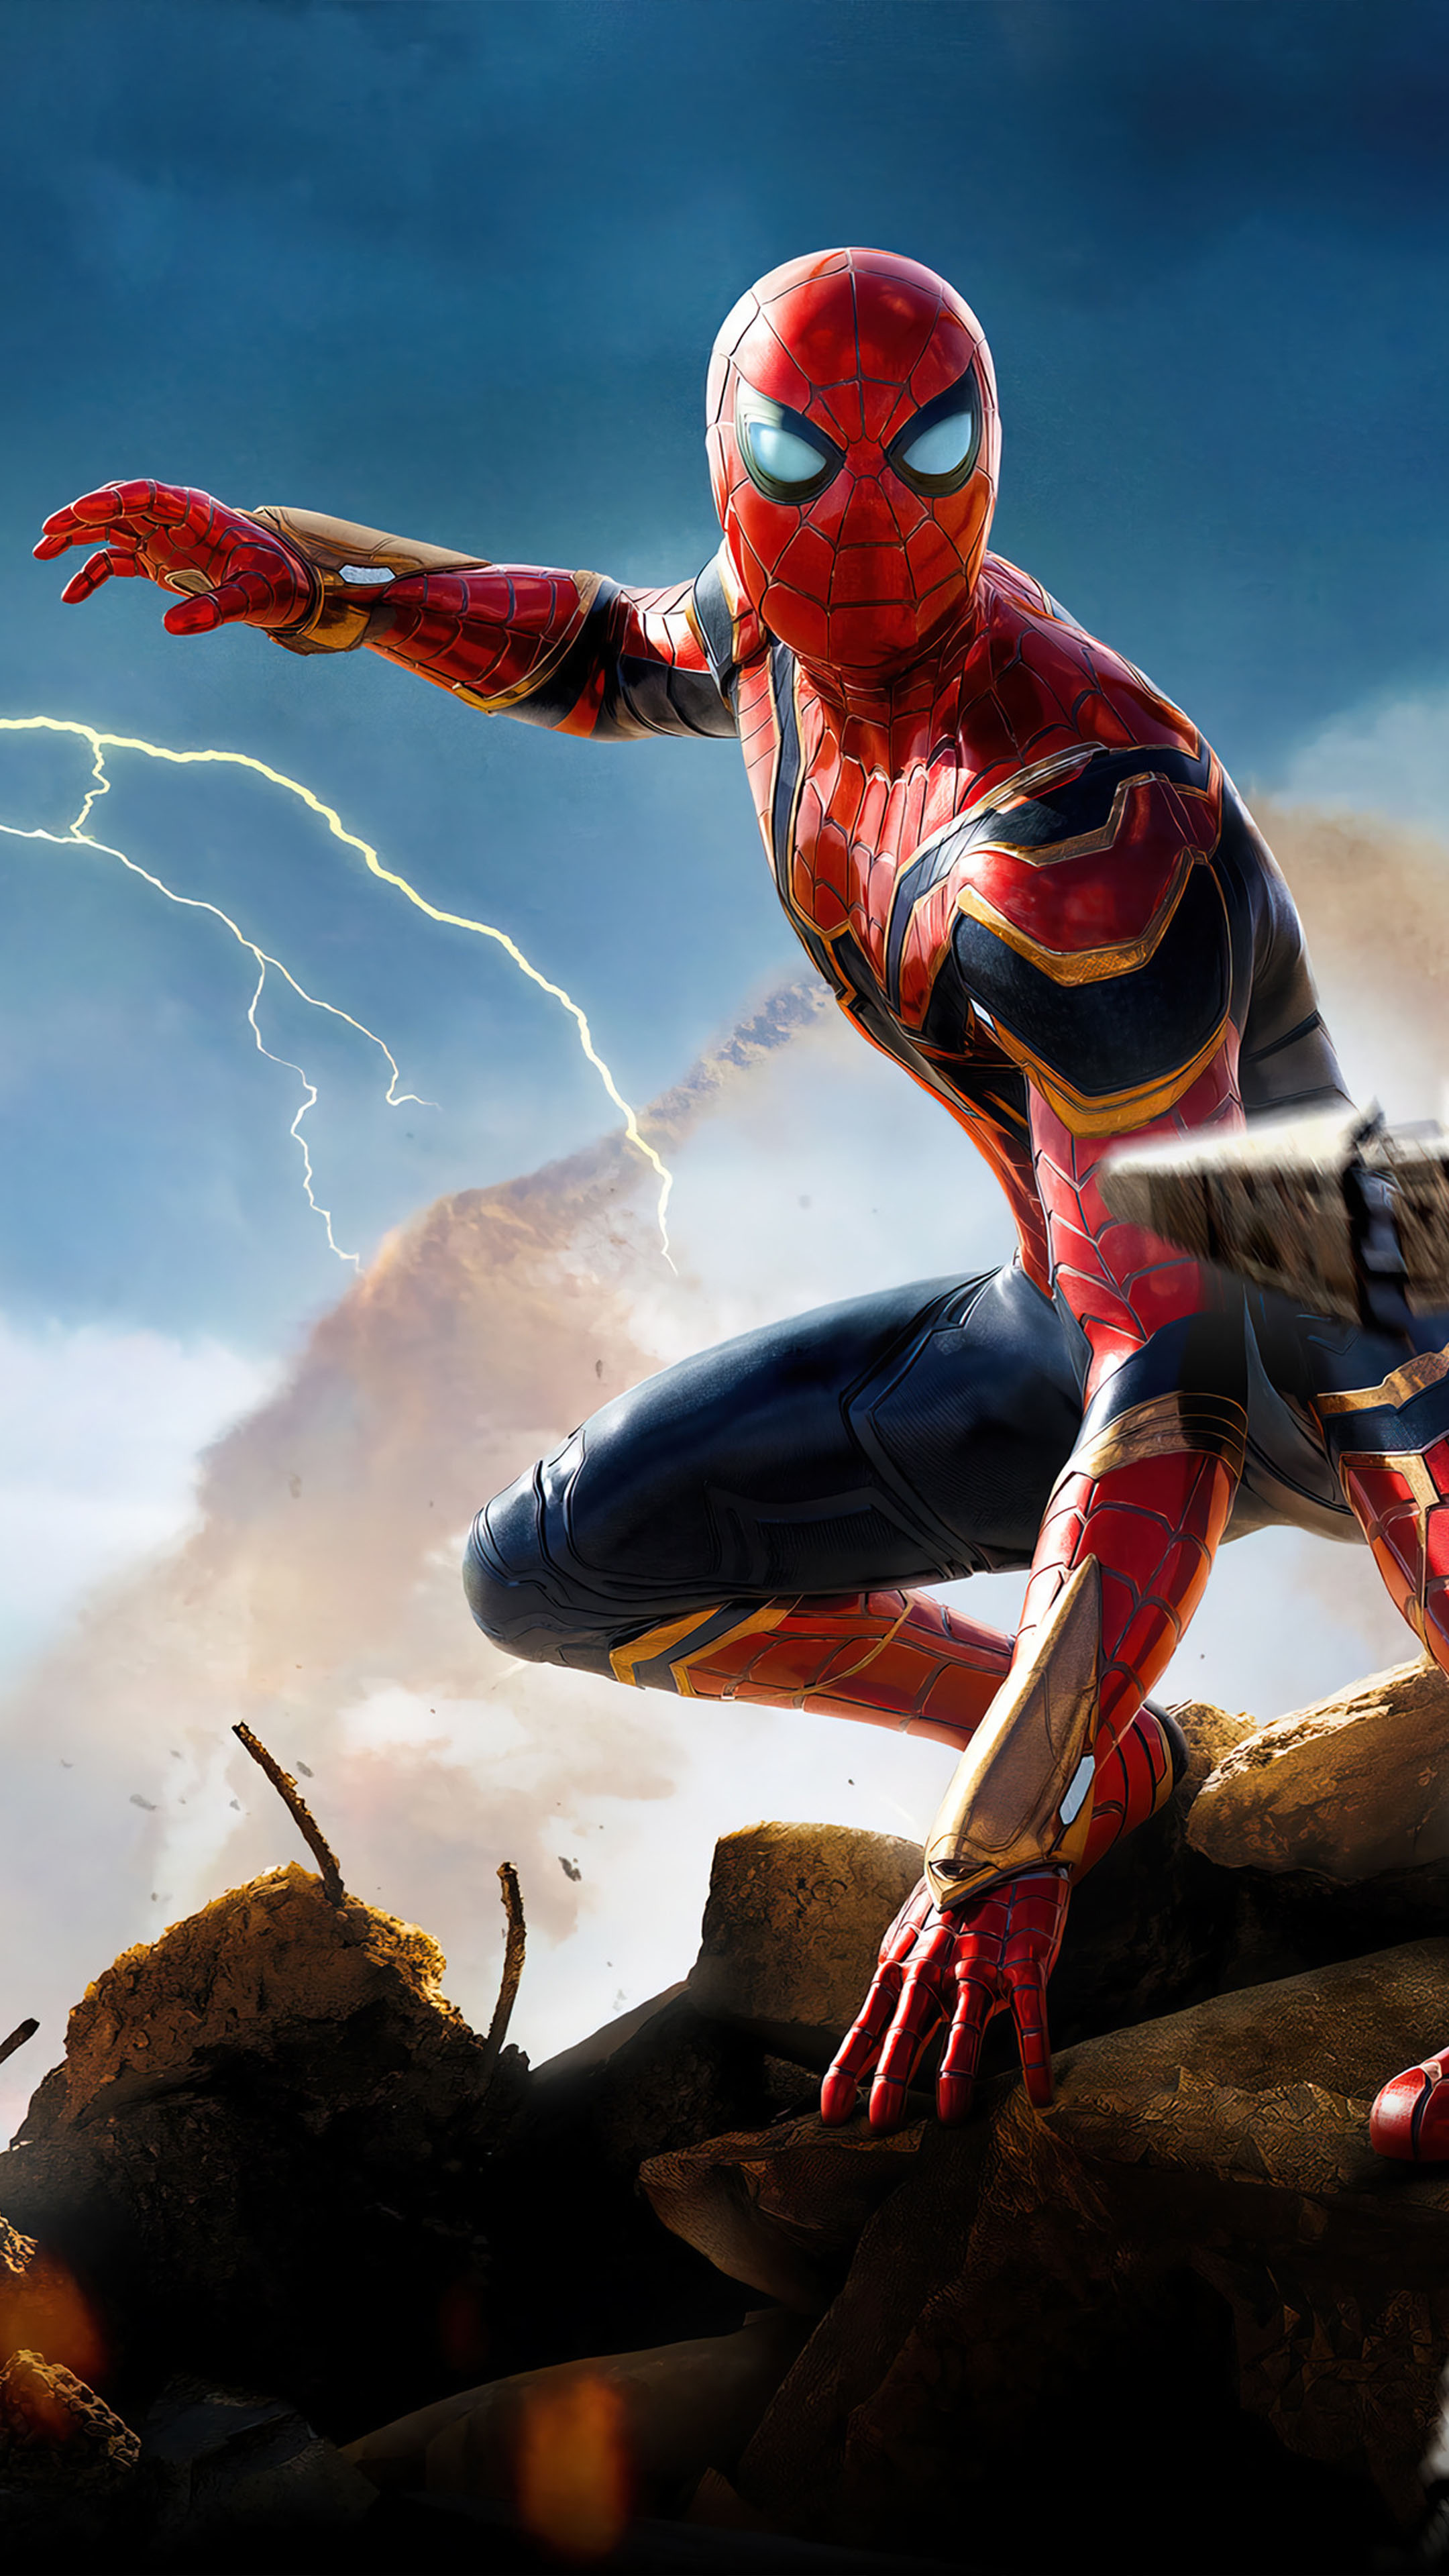 Spider-Man Far From Home PS4 4K wallpaper | Spider-man wallpaper, Man  wallpaper, Photoshop battle